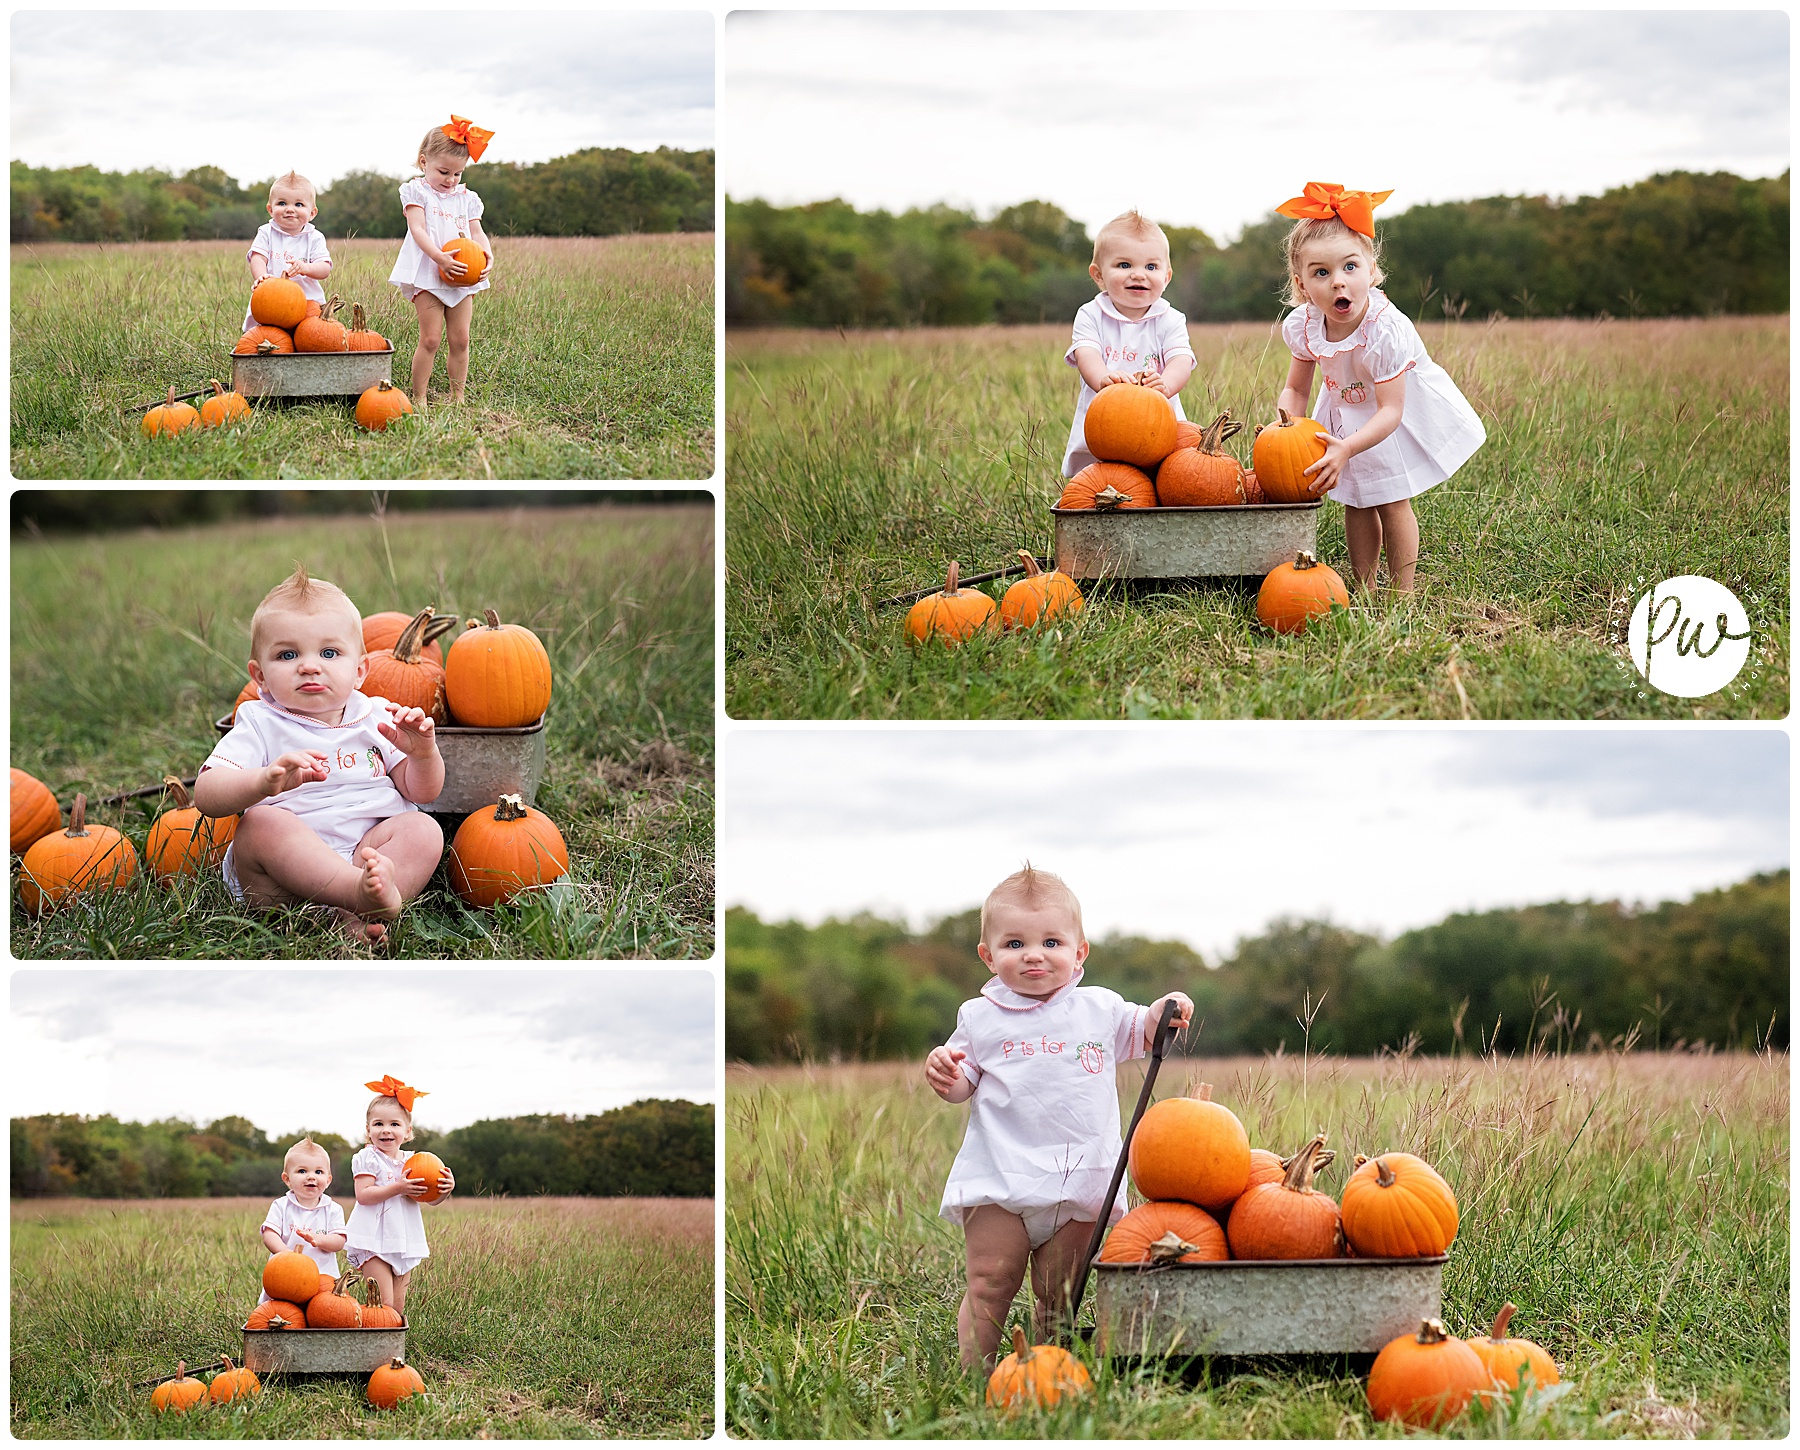 brother and sister playing with a wagon full of pumpkins